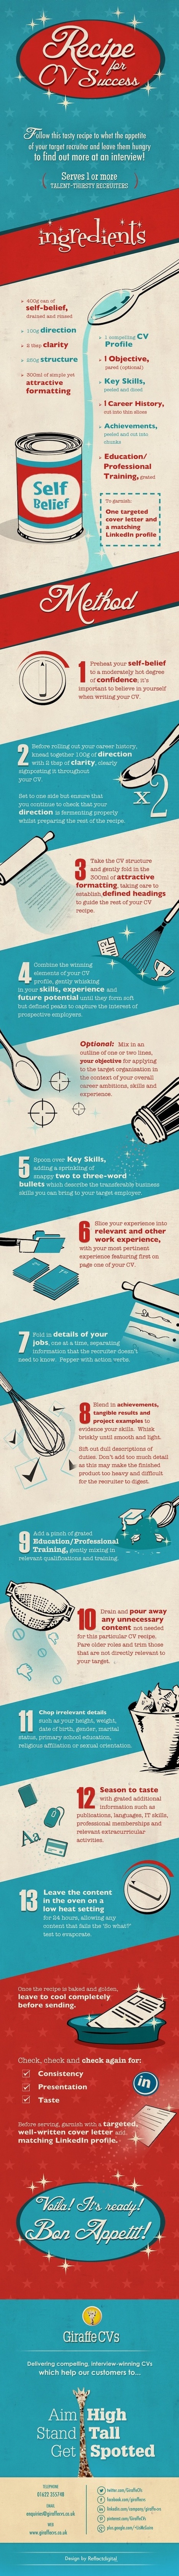 Want CV Success? Follow This Recipe! [INFOGRAPHIC] | Personal Branding & Leadership Coaching | Scoop.it